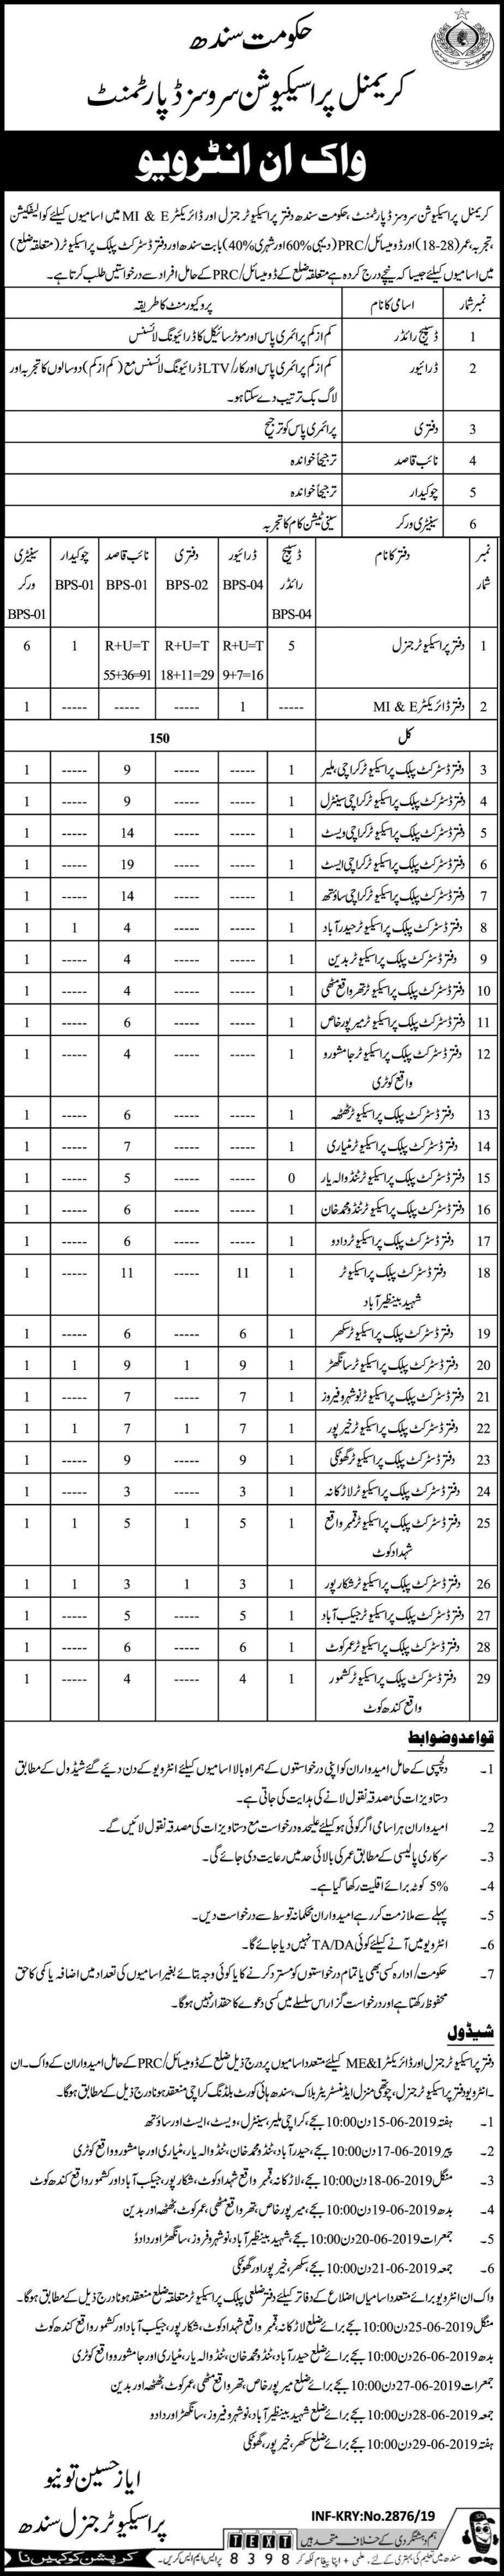 Criminal Prosecution Services Department Sindh Jobs 2019 192+ Dispatch Riders, Drivers & Support Staff (Walk-in Interviews)